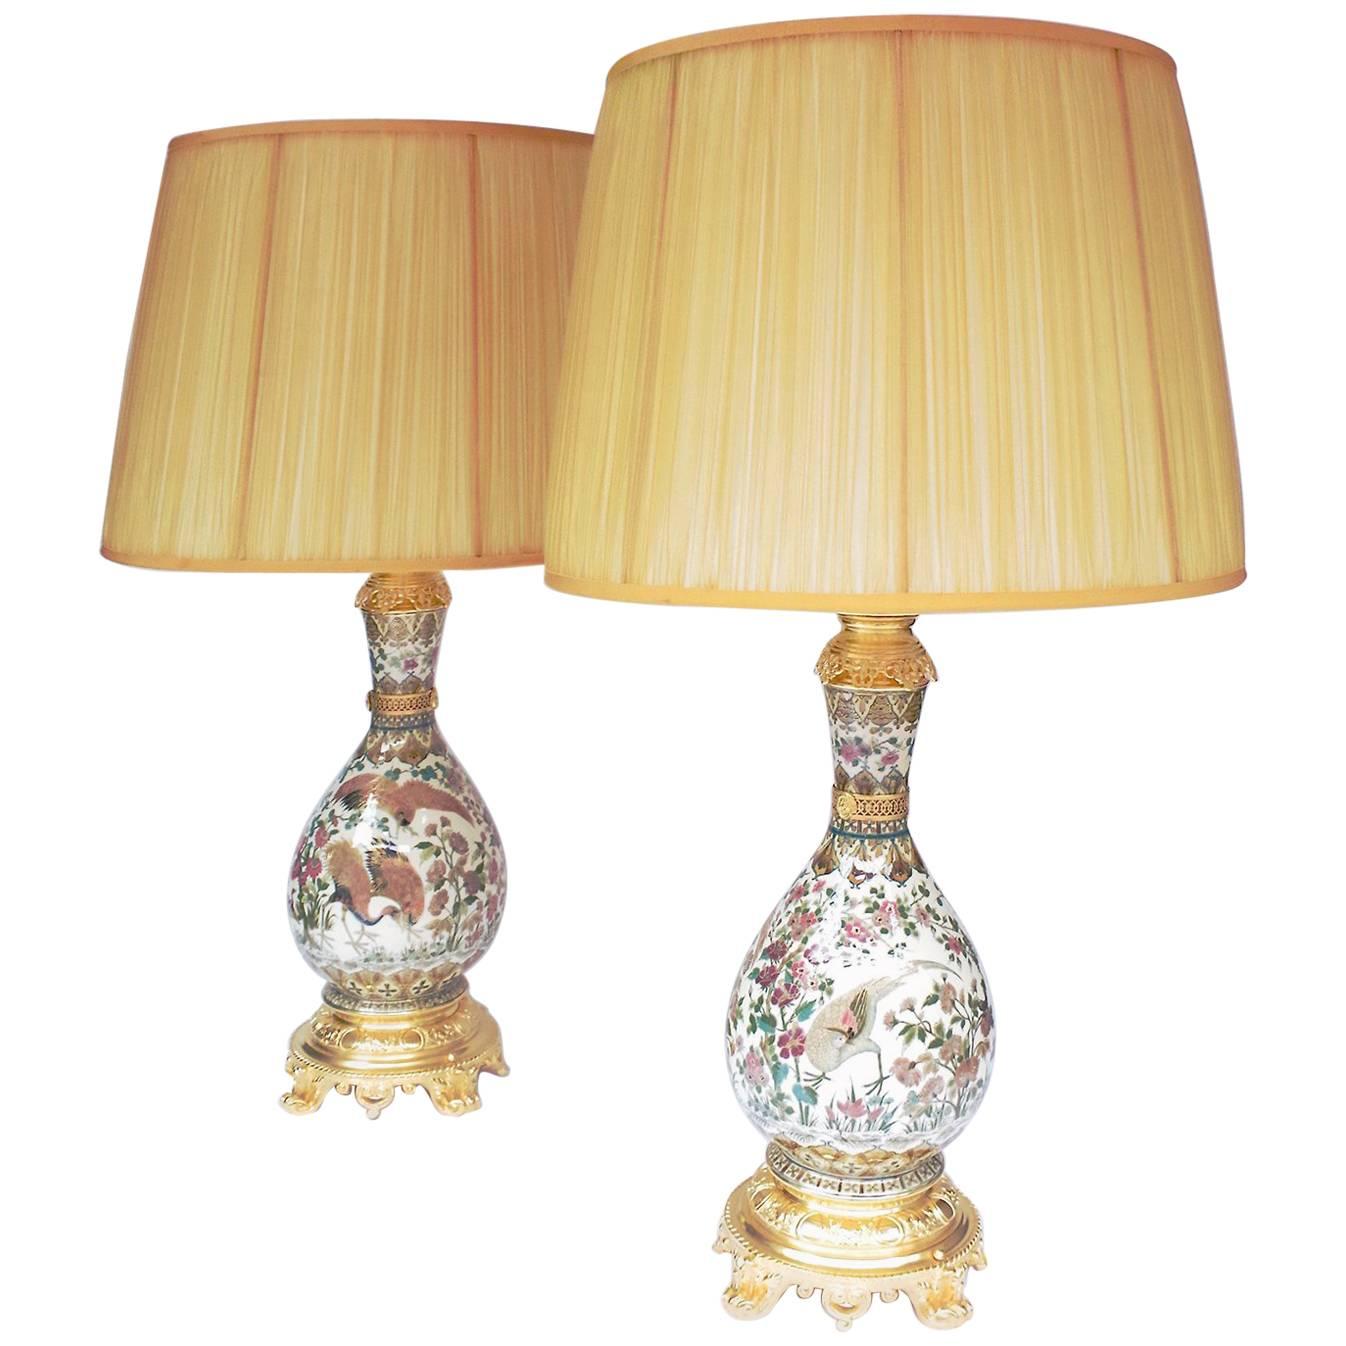 Pair of Zsolnay Porcelain Lamps, Cream Color and Birds Patterns, circa 1880